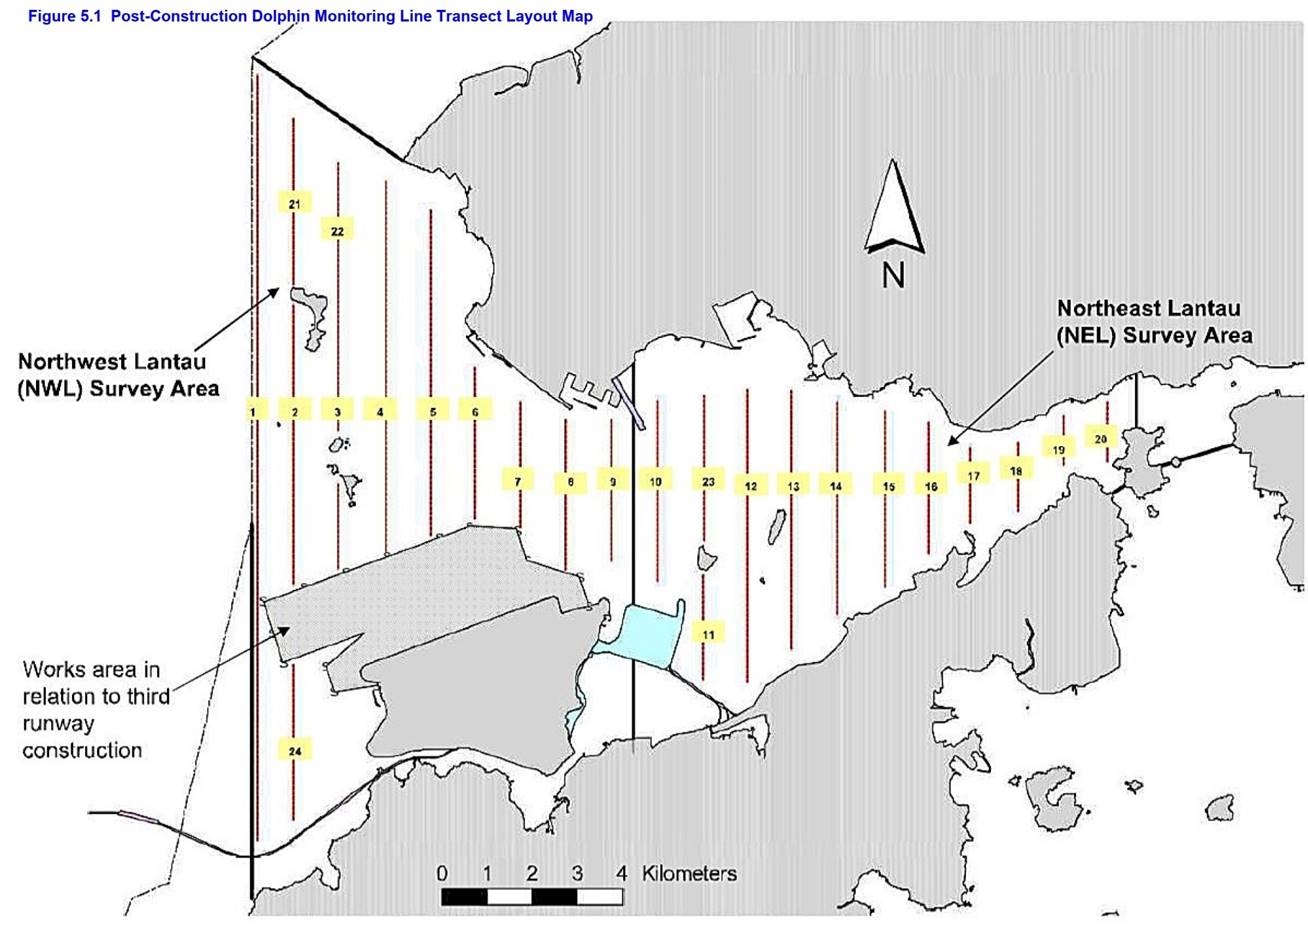 Figure 5_1 Dolphin monitoring transect surveys_revised (post-construction)